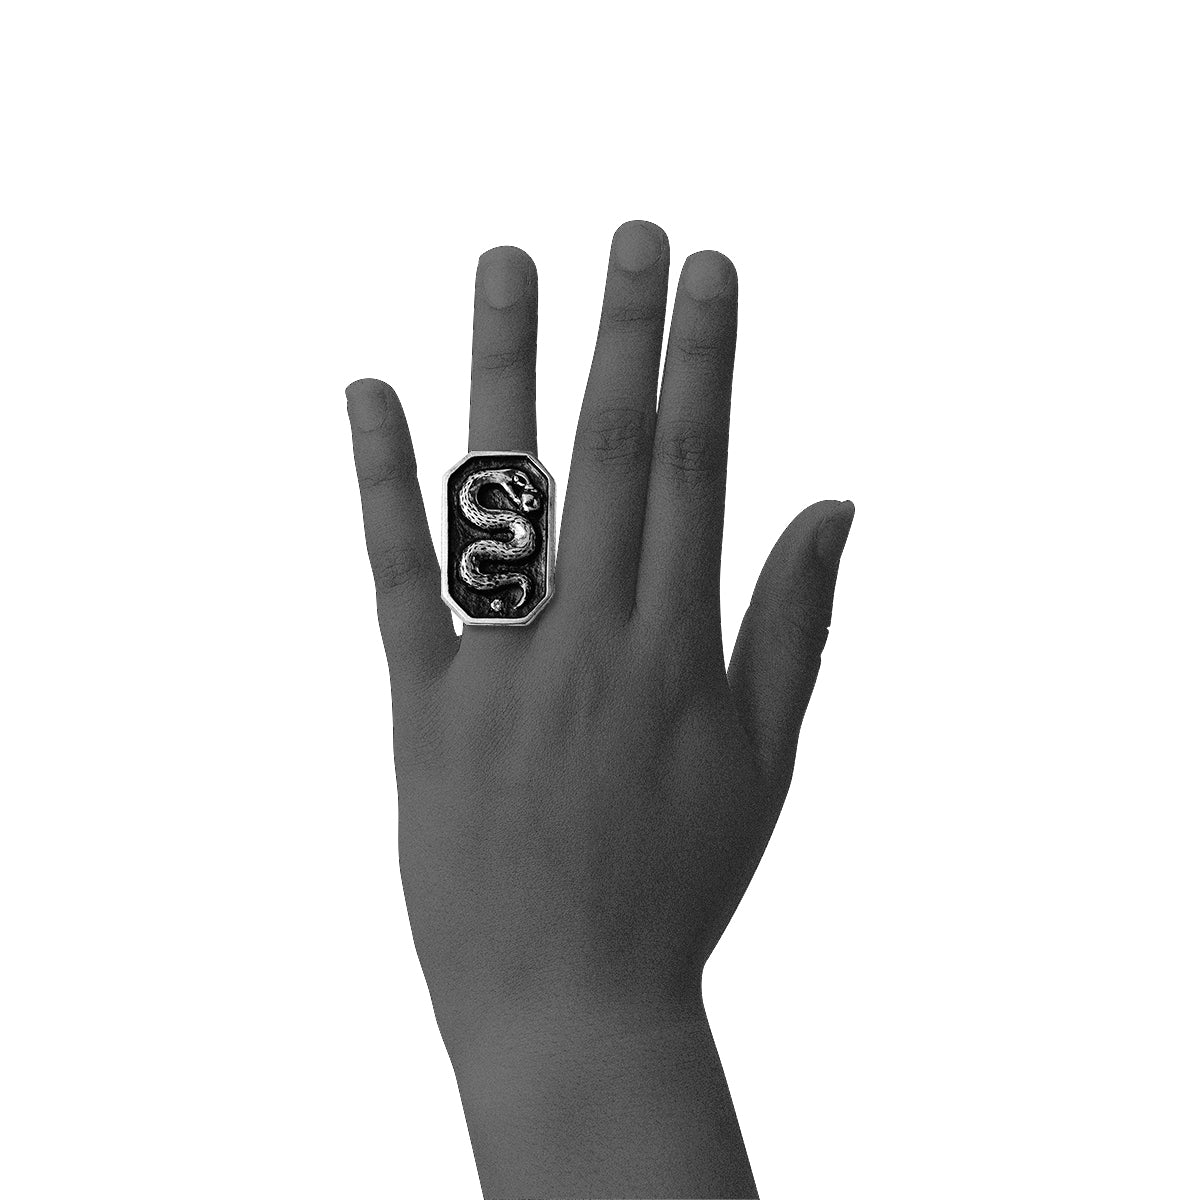 THE ORIGINAL SIN RING IN SILVER